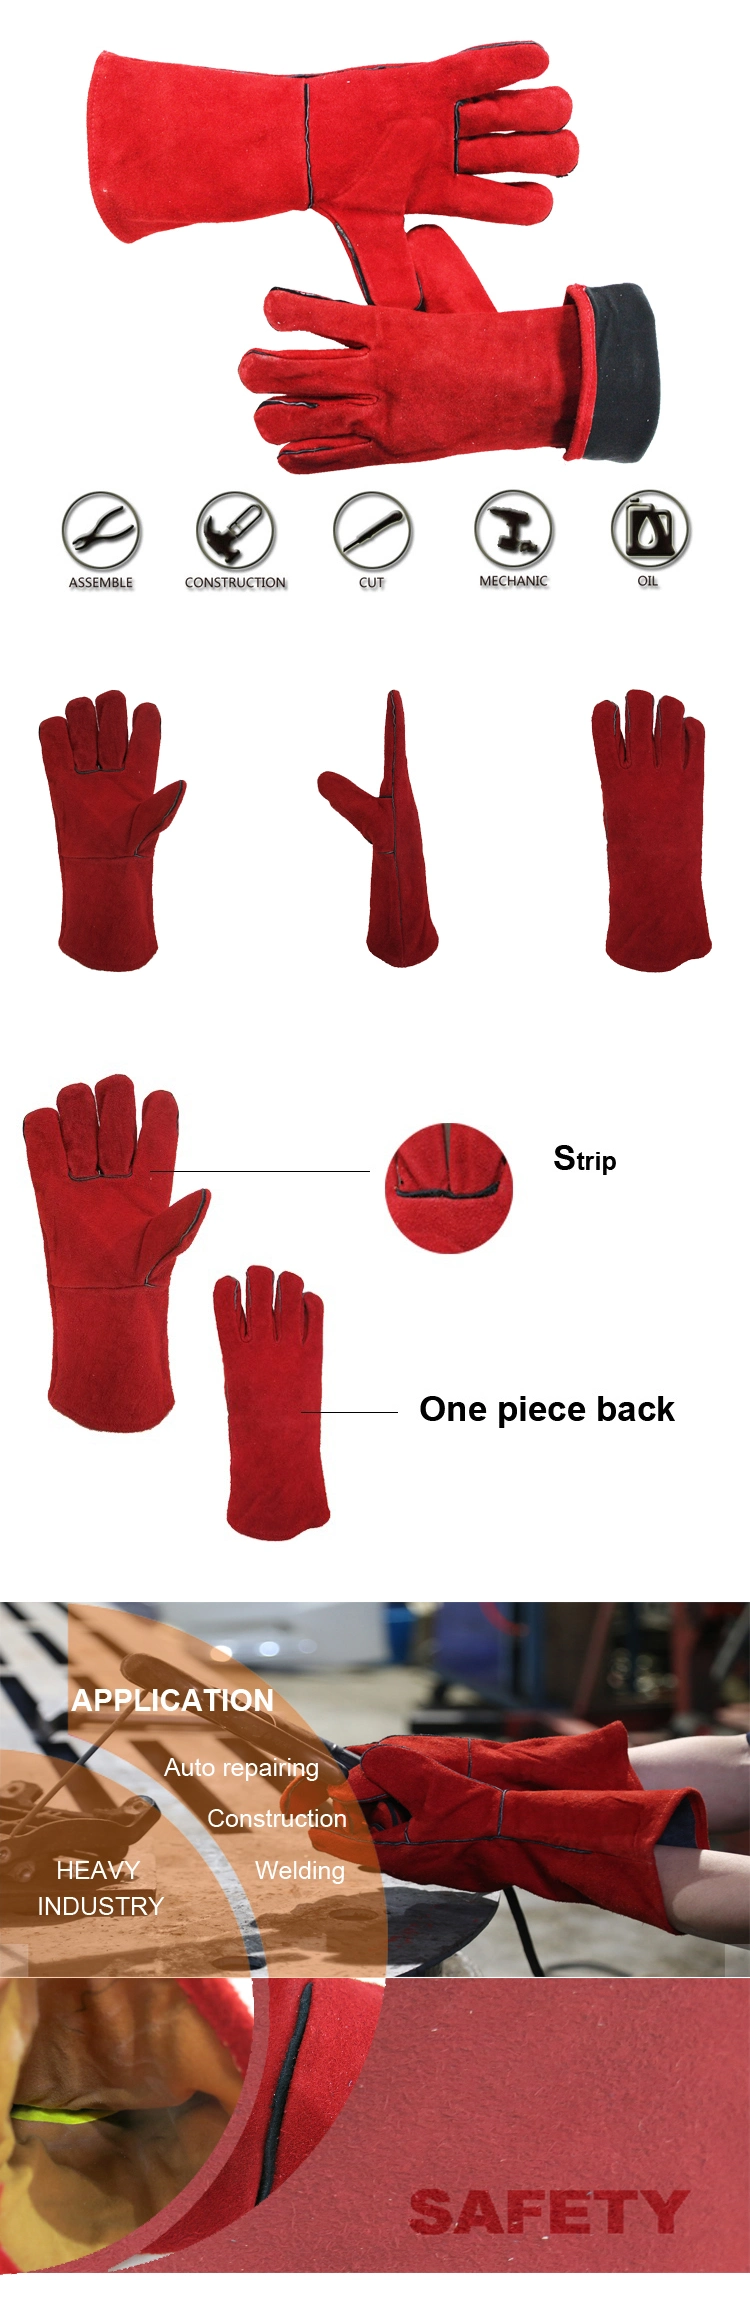 Red One Piece Back Cow Split Leather Working Gloves for Welding